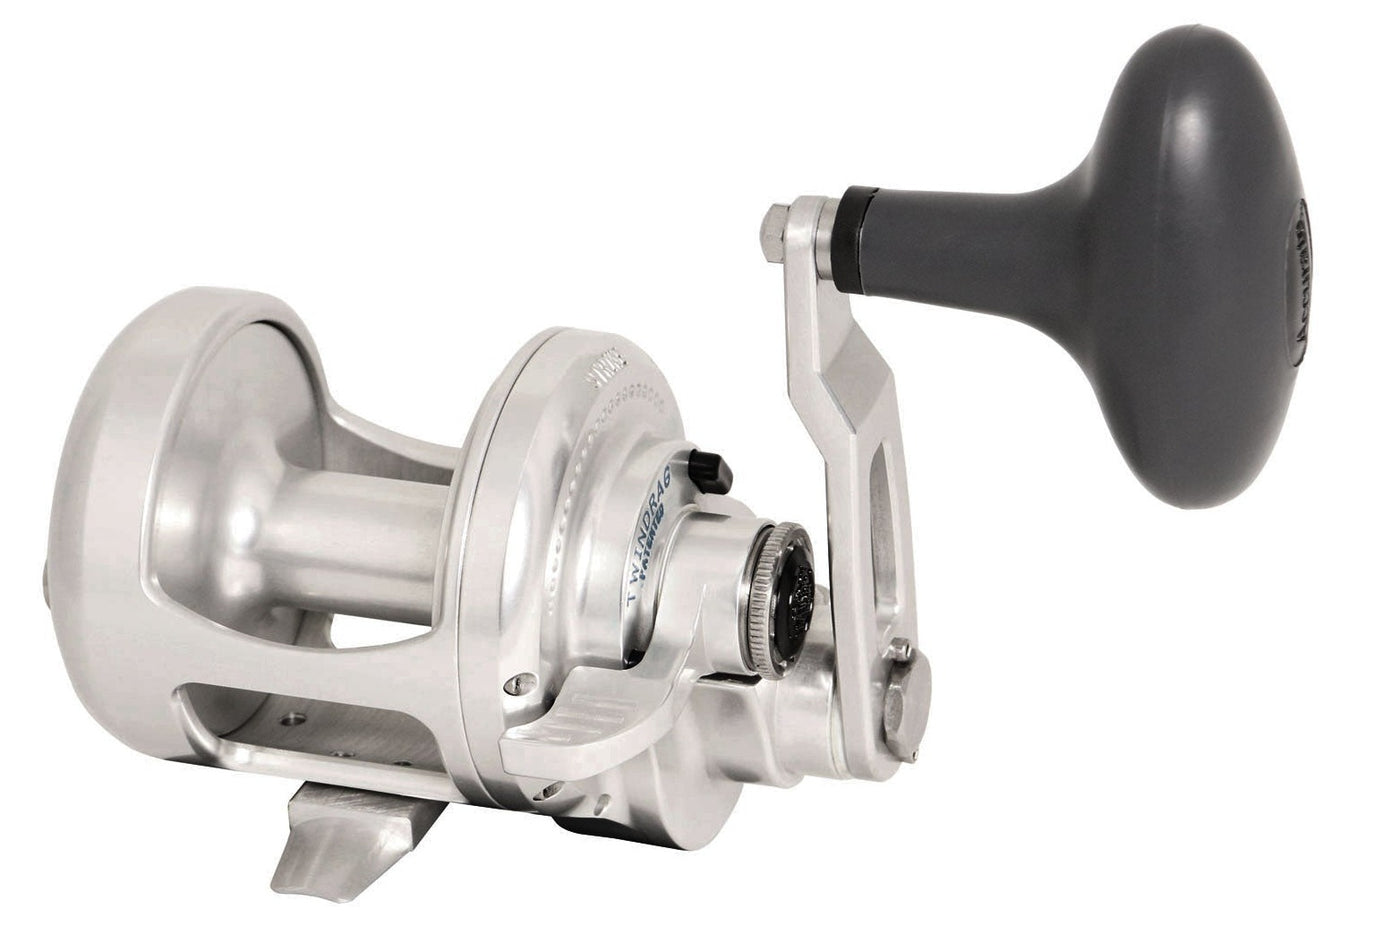 Accurate Boss Xtreme Single Speed Lever Drag Reels – White Water